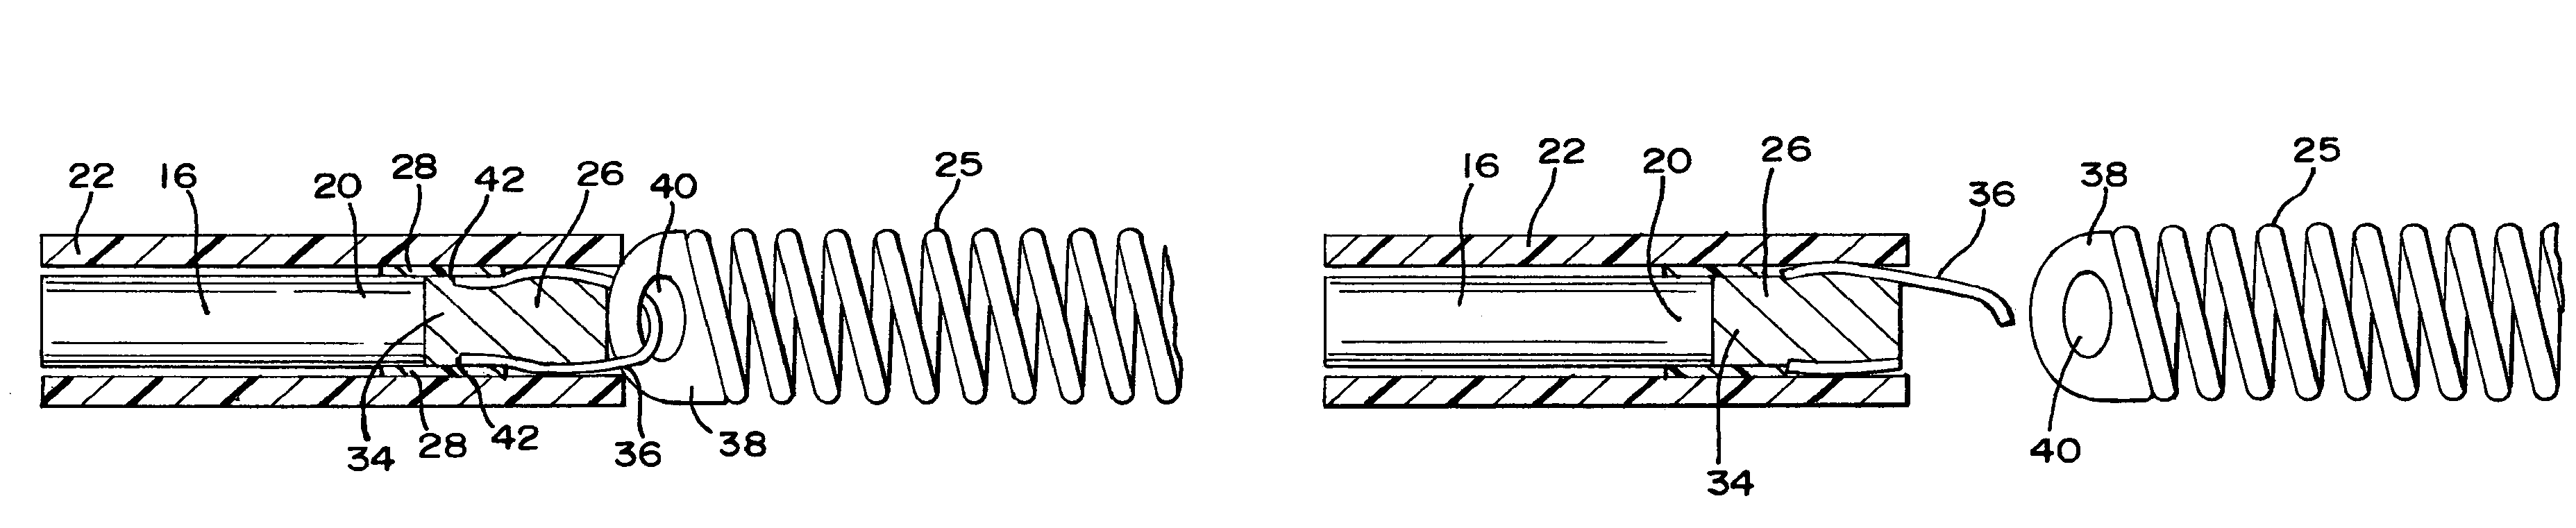 Laser-based vascular occlusion device detachment system